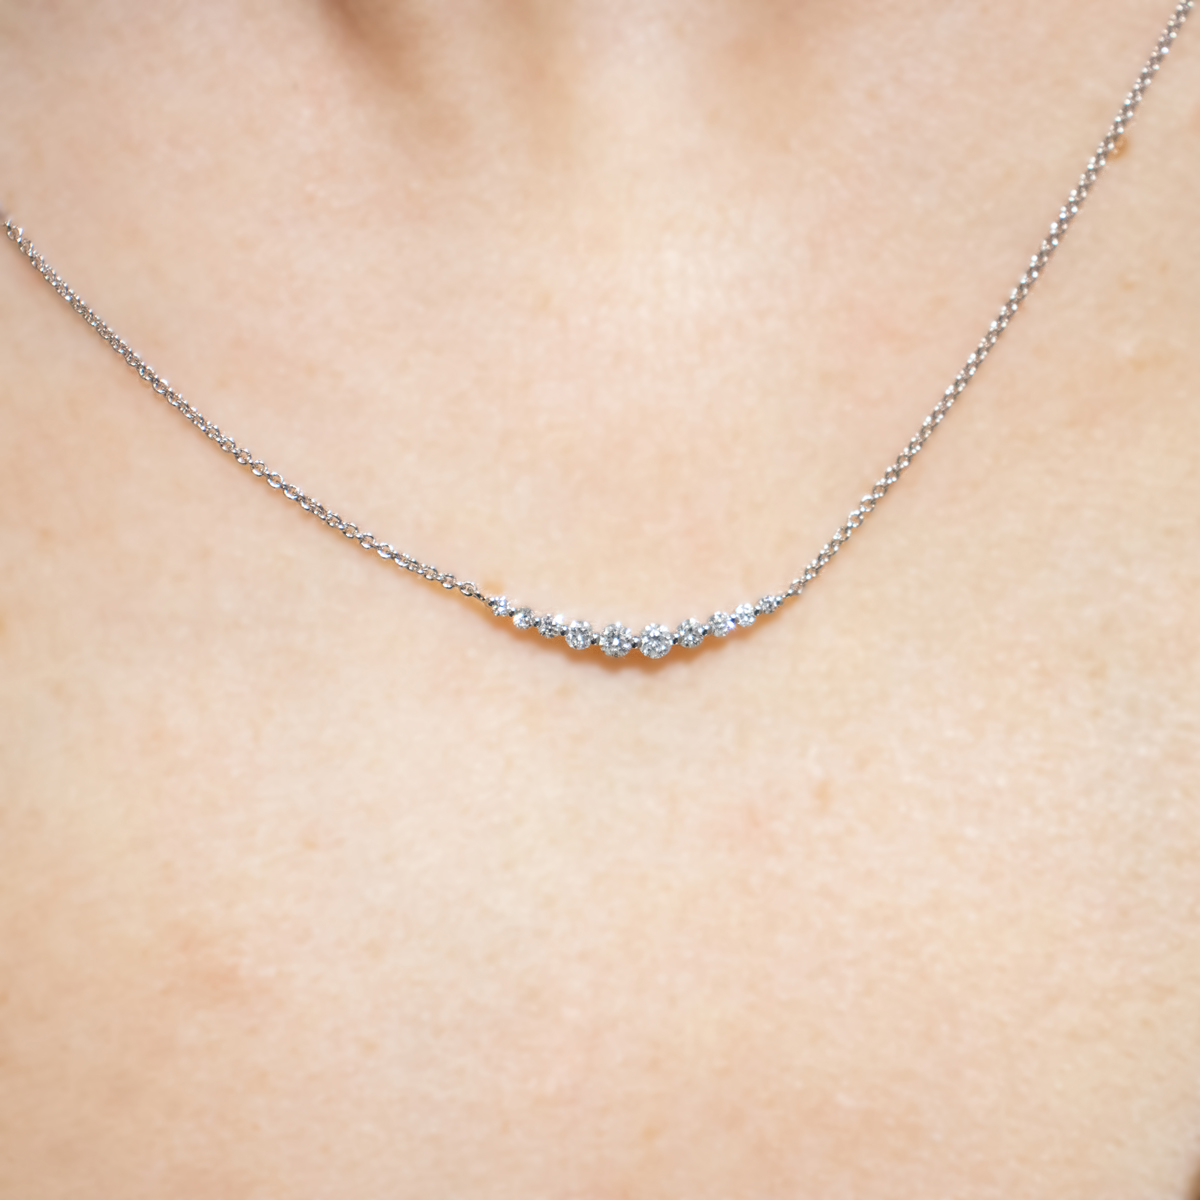 Diamond Curved Bar Necklace, 14k White Gold